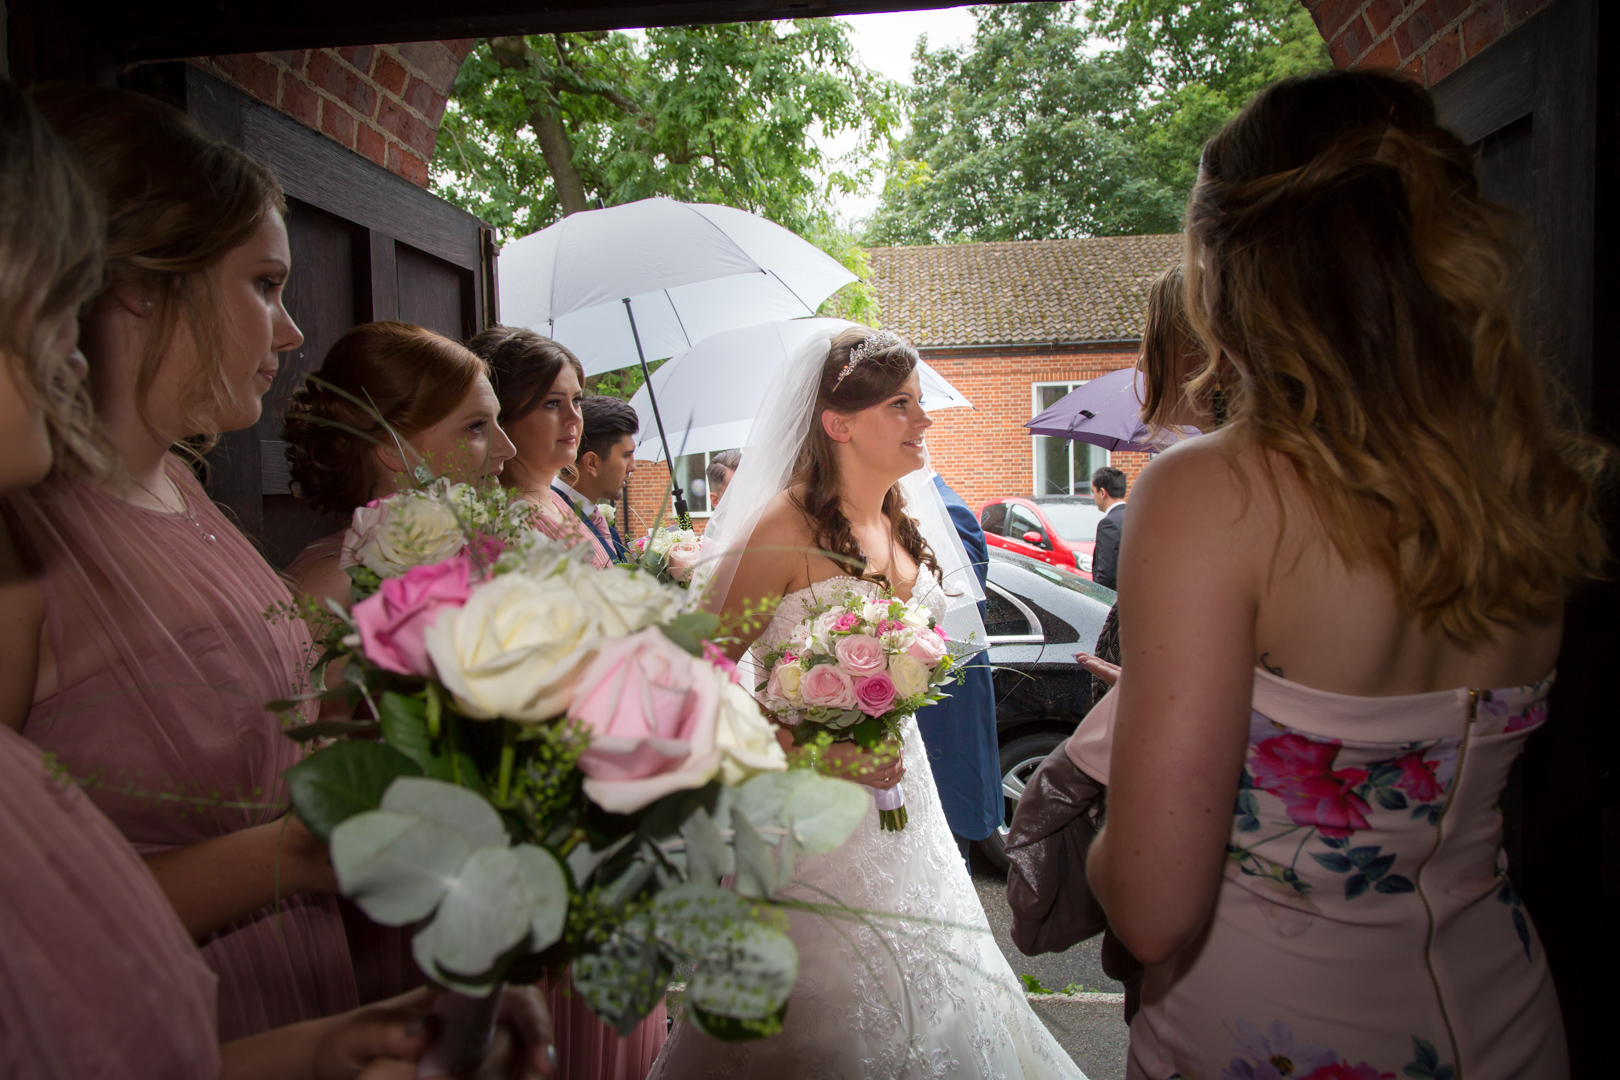 The Bride & Bridesmaids photographed at St Lawrence's Church, Eastcote, Pinner Middlesex by Tim Durham of Pinner Wedding Photograph